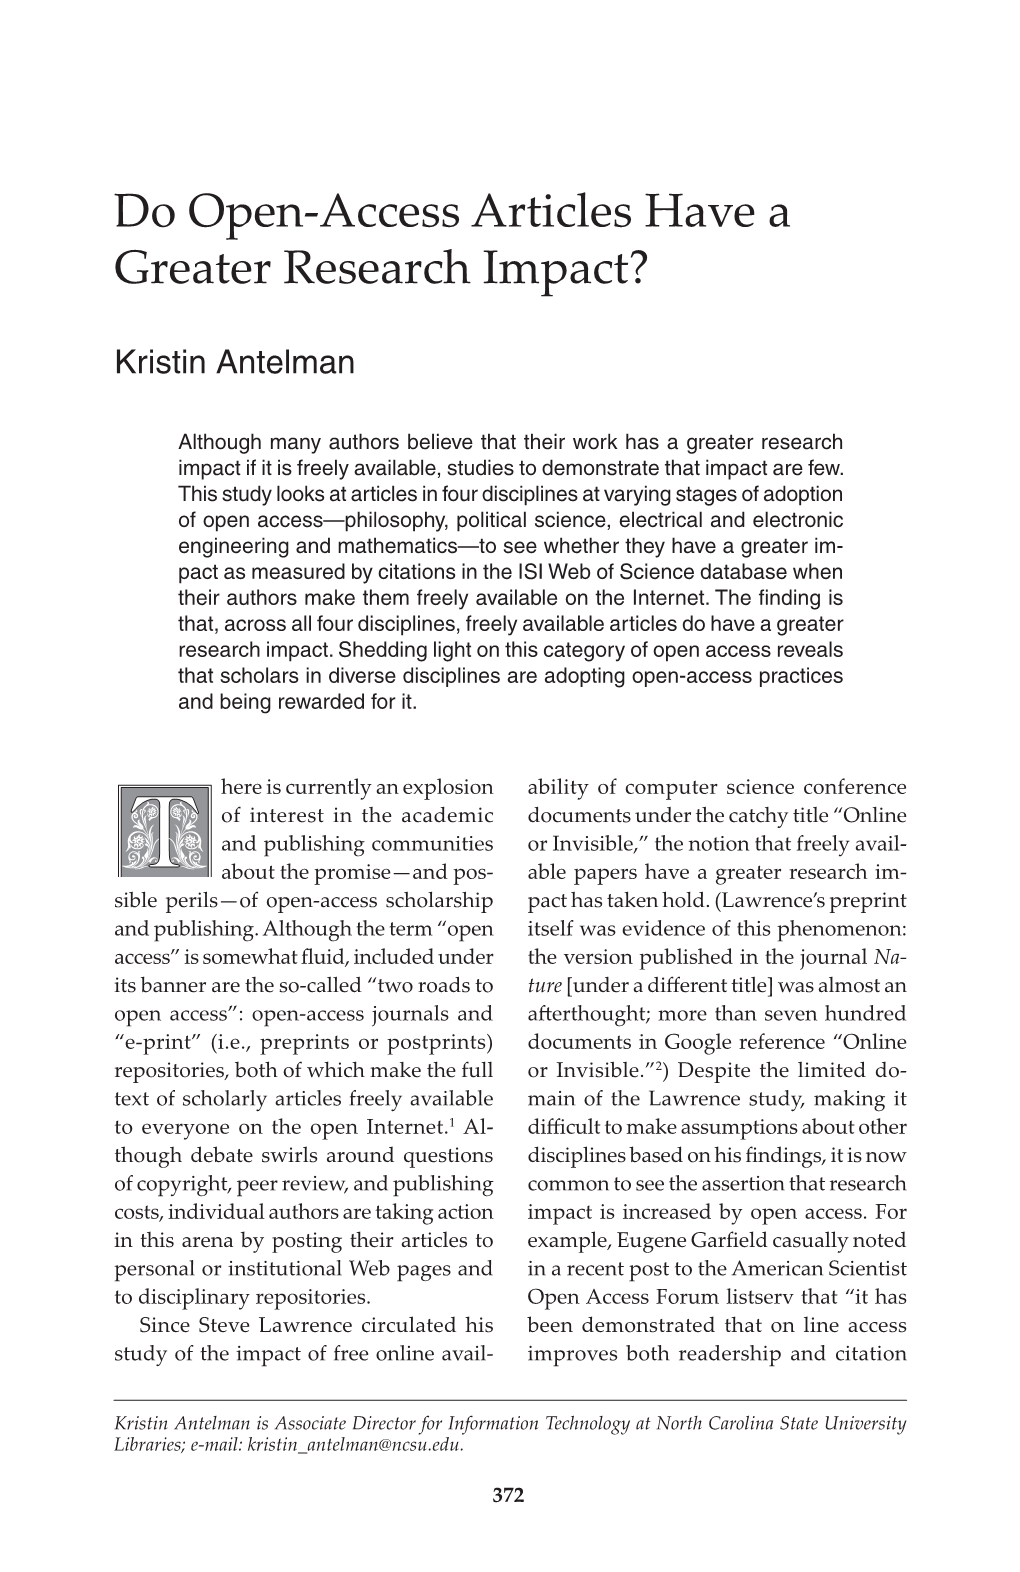 Do Open-Access Articles Have a Greater Research Impact?